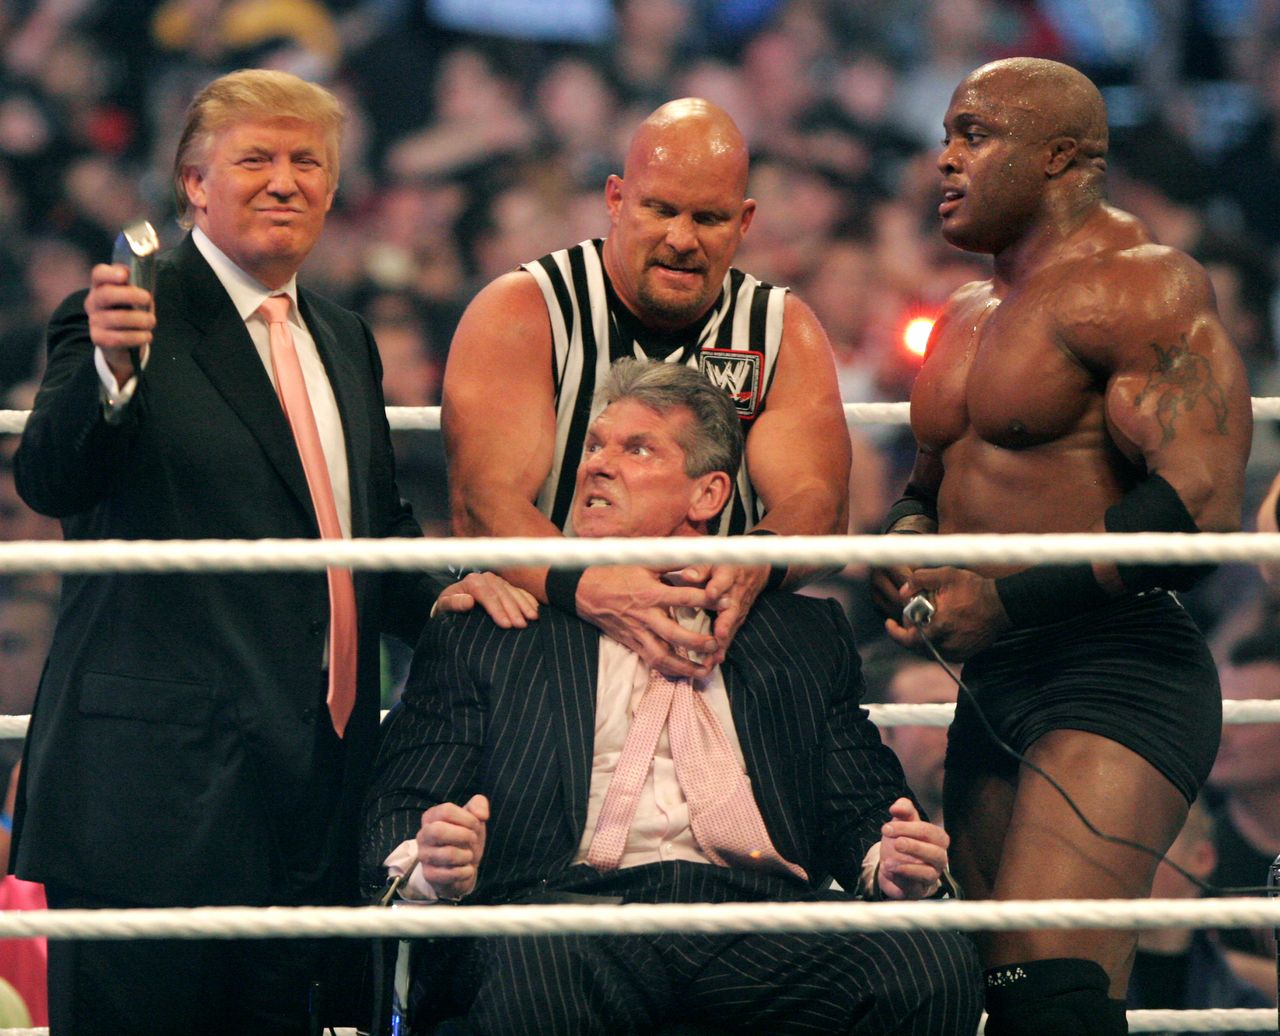 Even as he was shaving McMahon's head, Trump knew that he'd soon join the list of the match's losers.